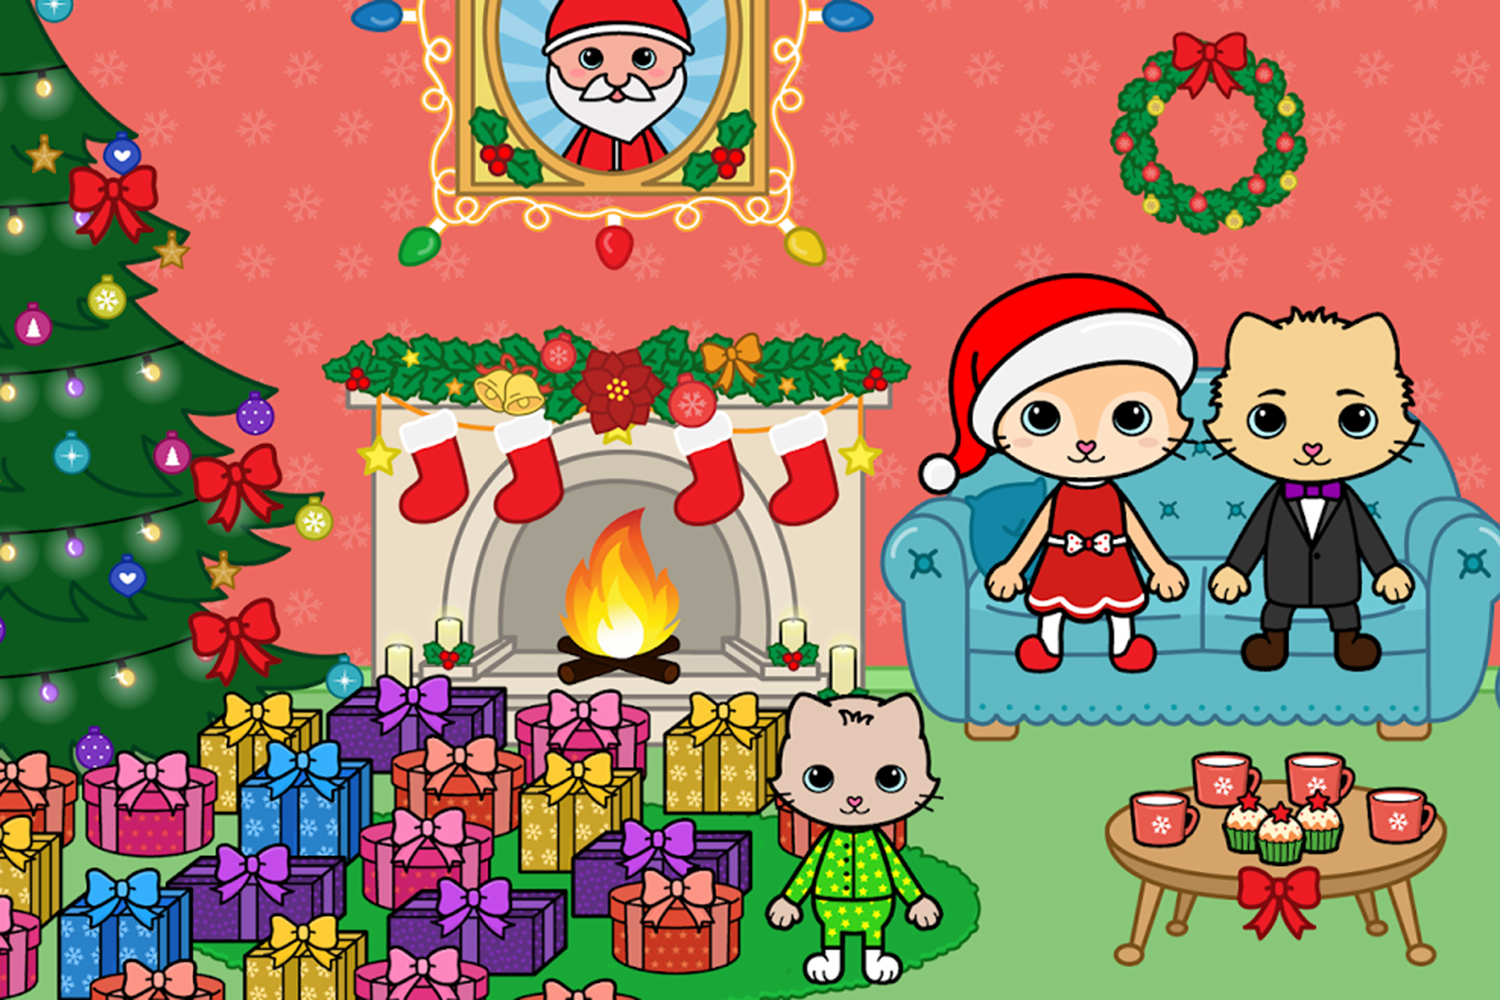 10 Christmas apps for parents to share with kids this season